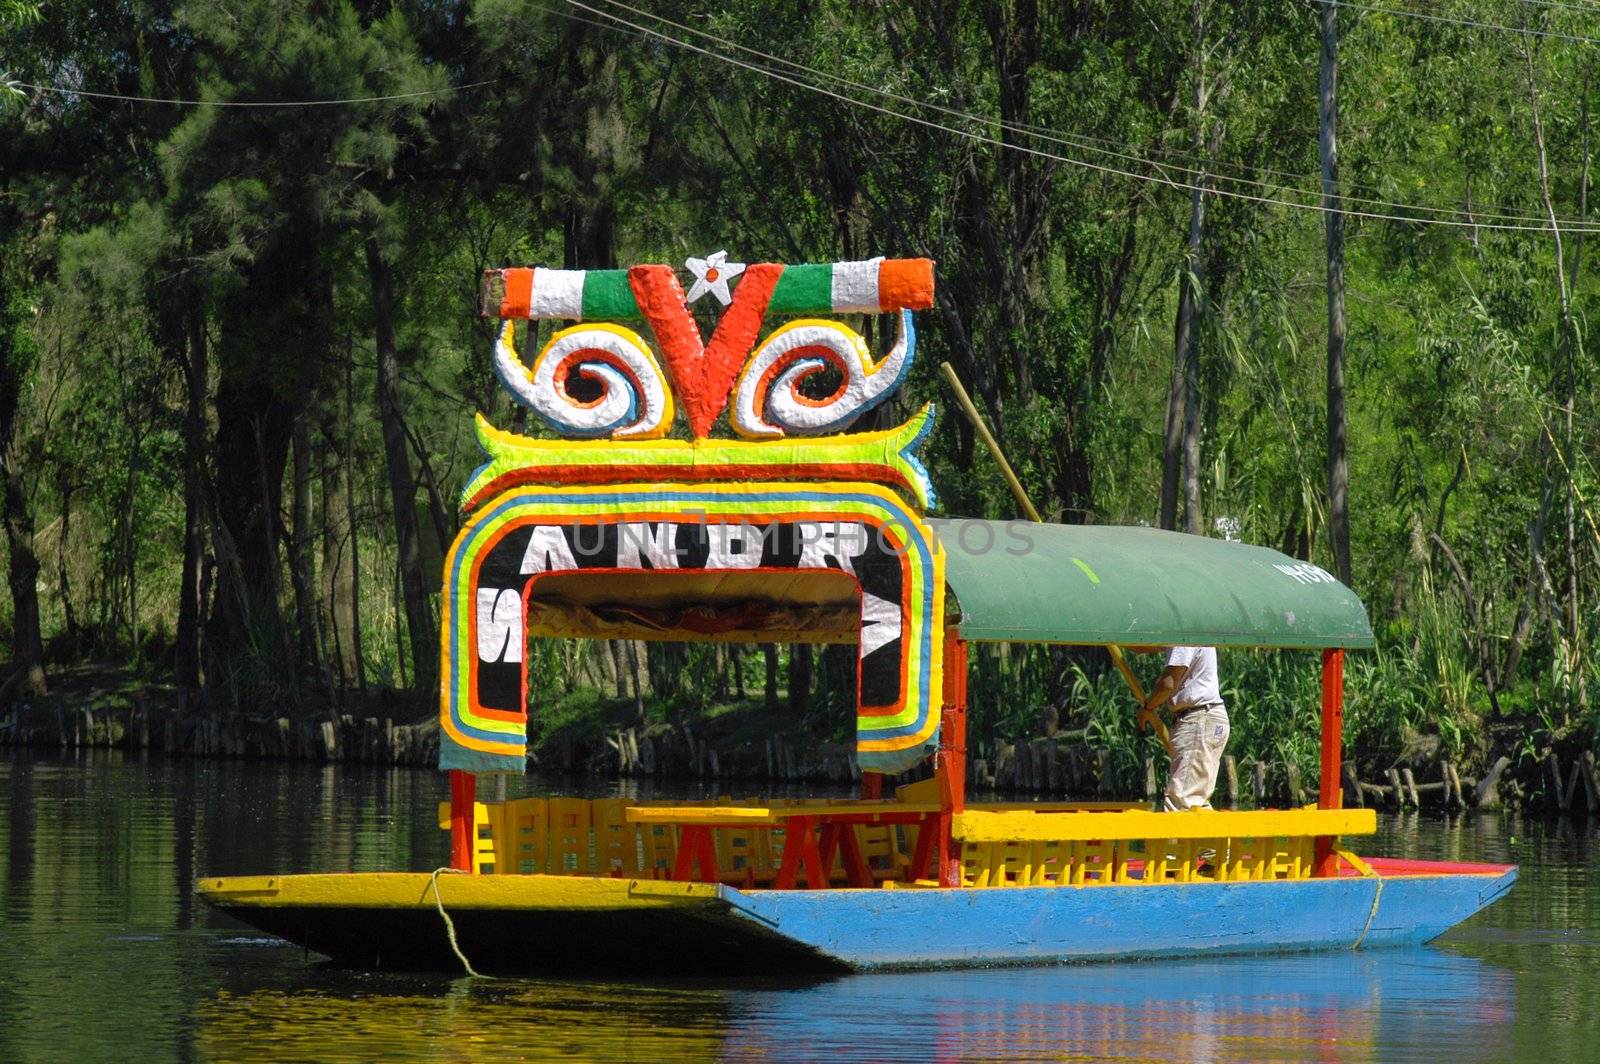 Floating garden on boat in Mexico city, Xochimilco